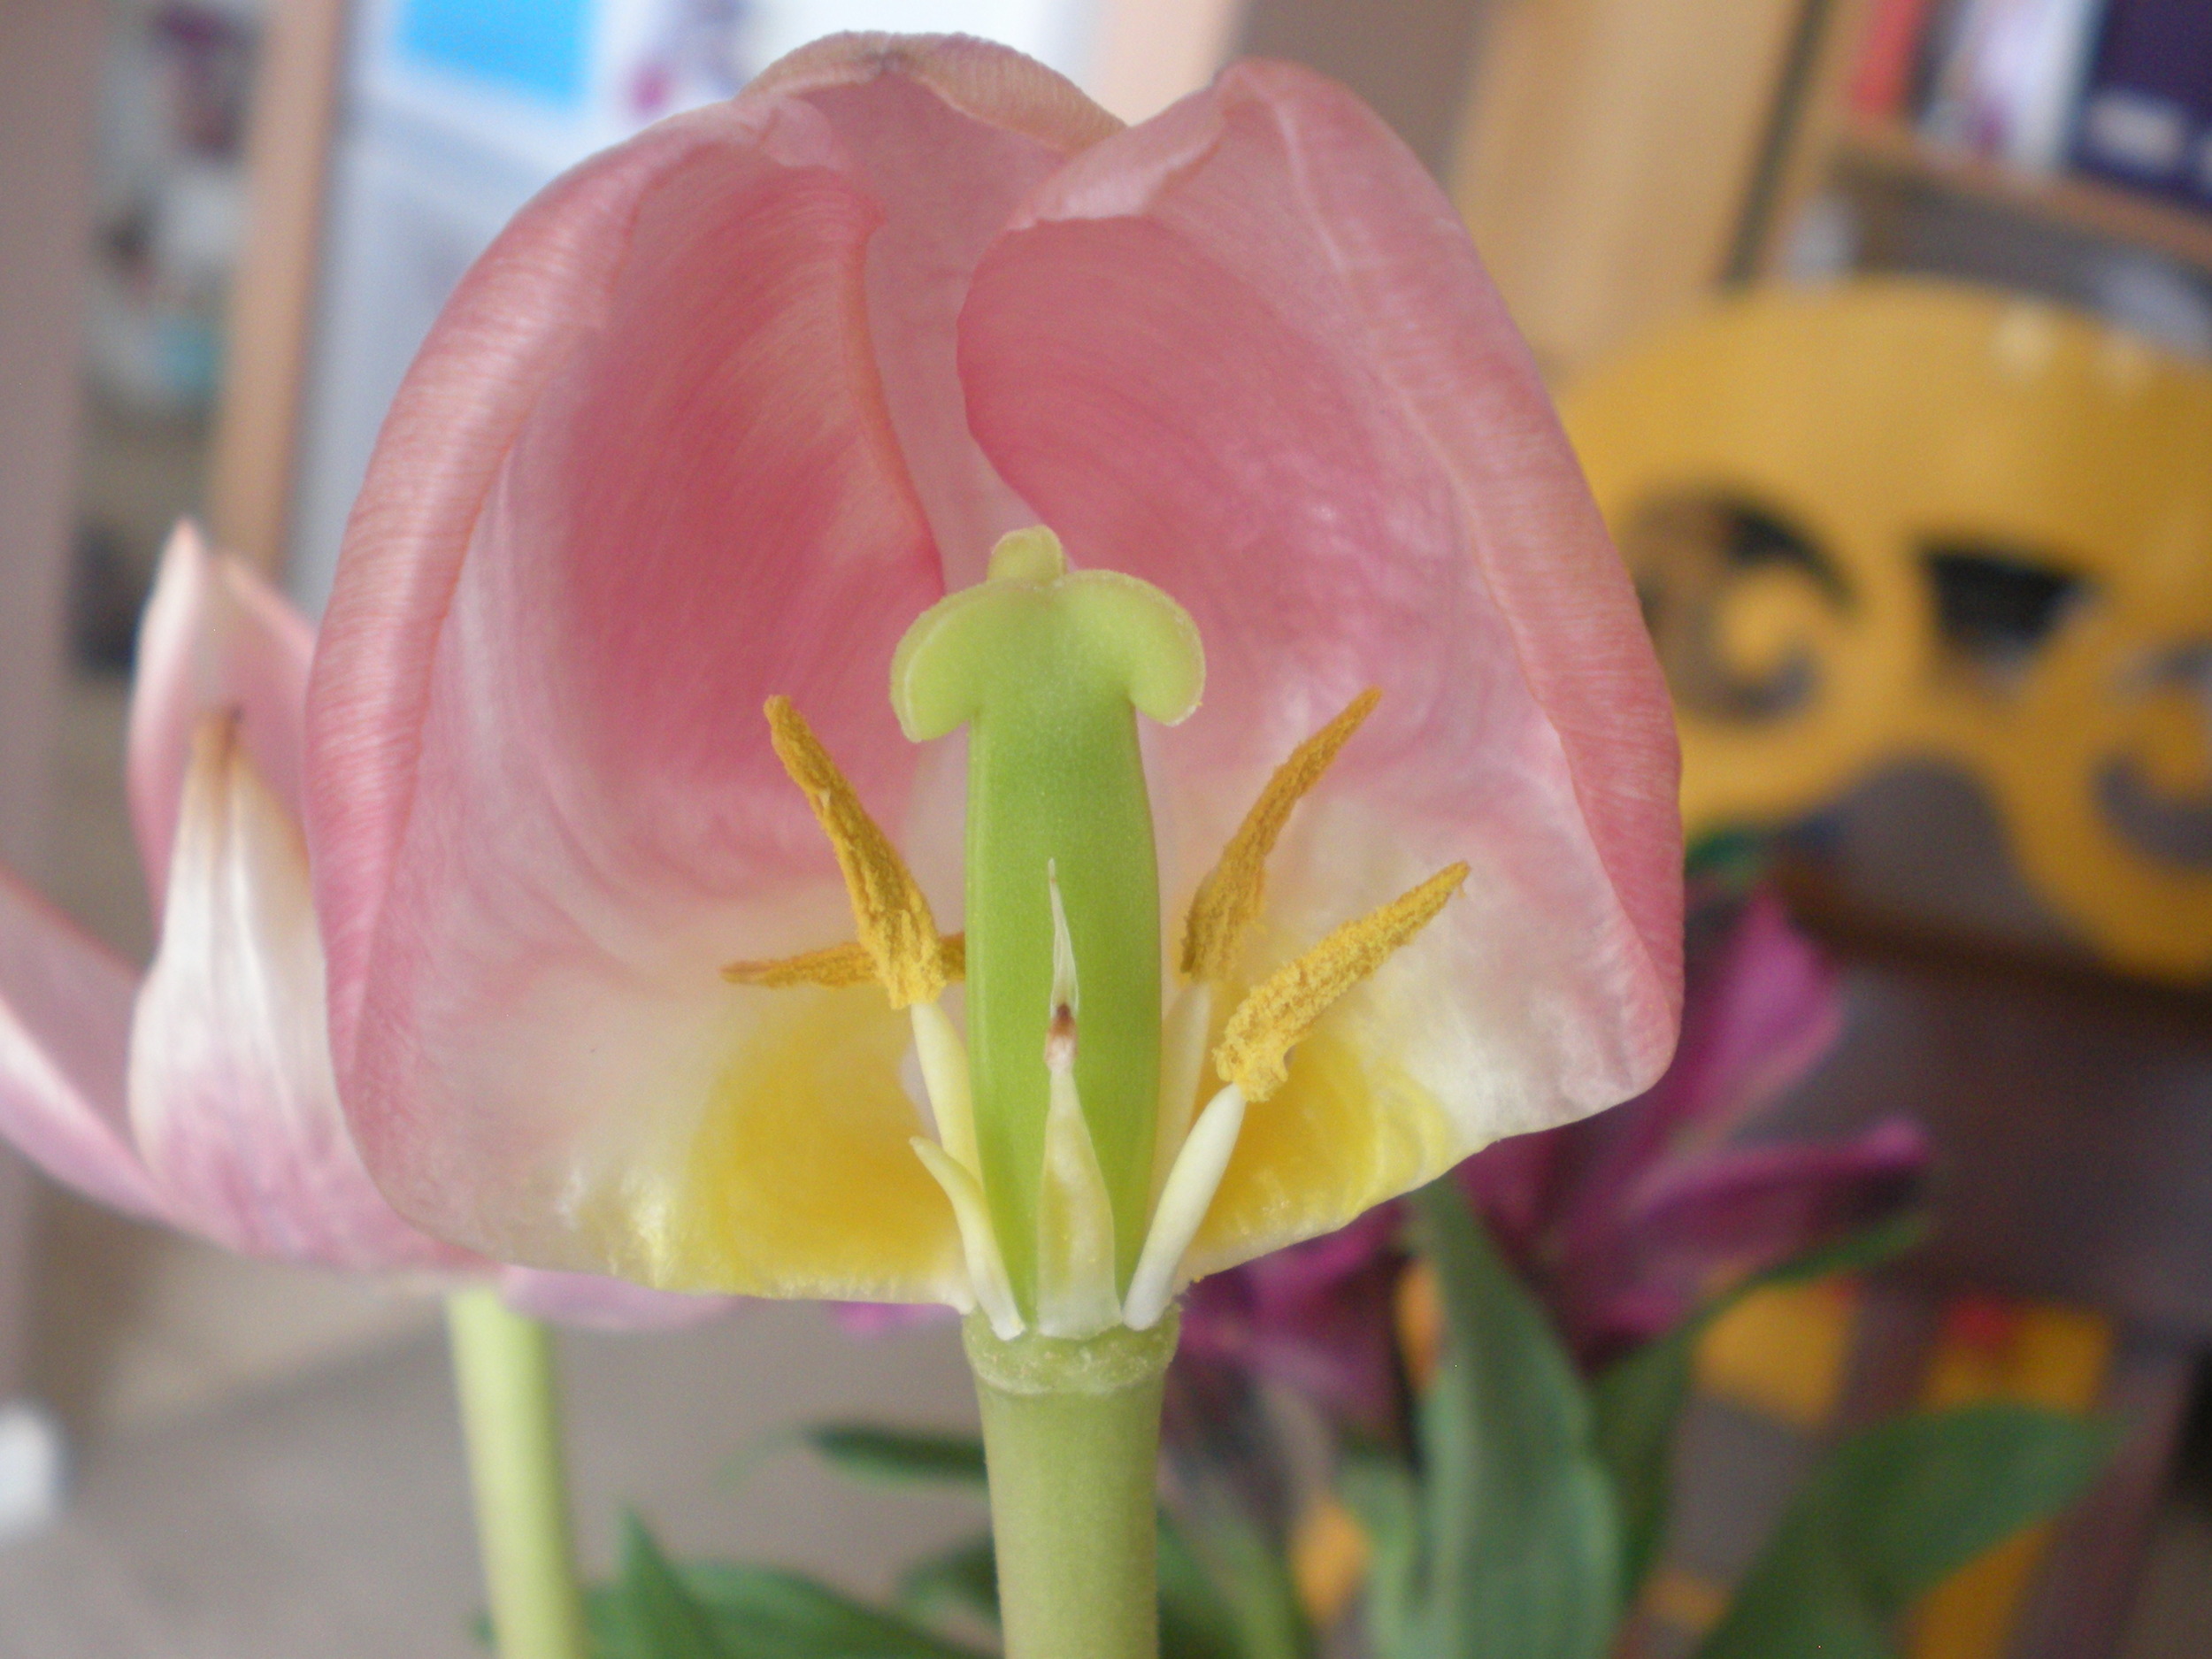 Have you ever looked inside a tulip?  There is a lot going on!  